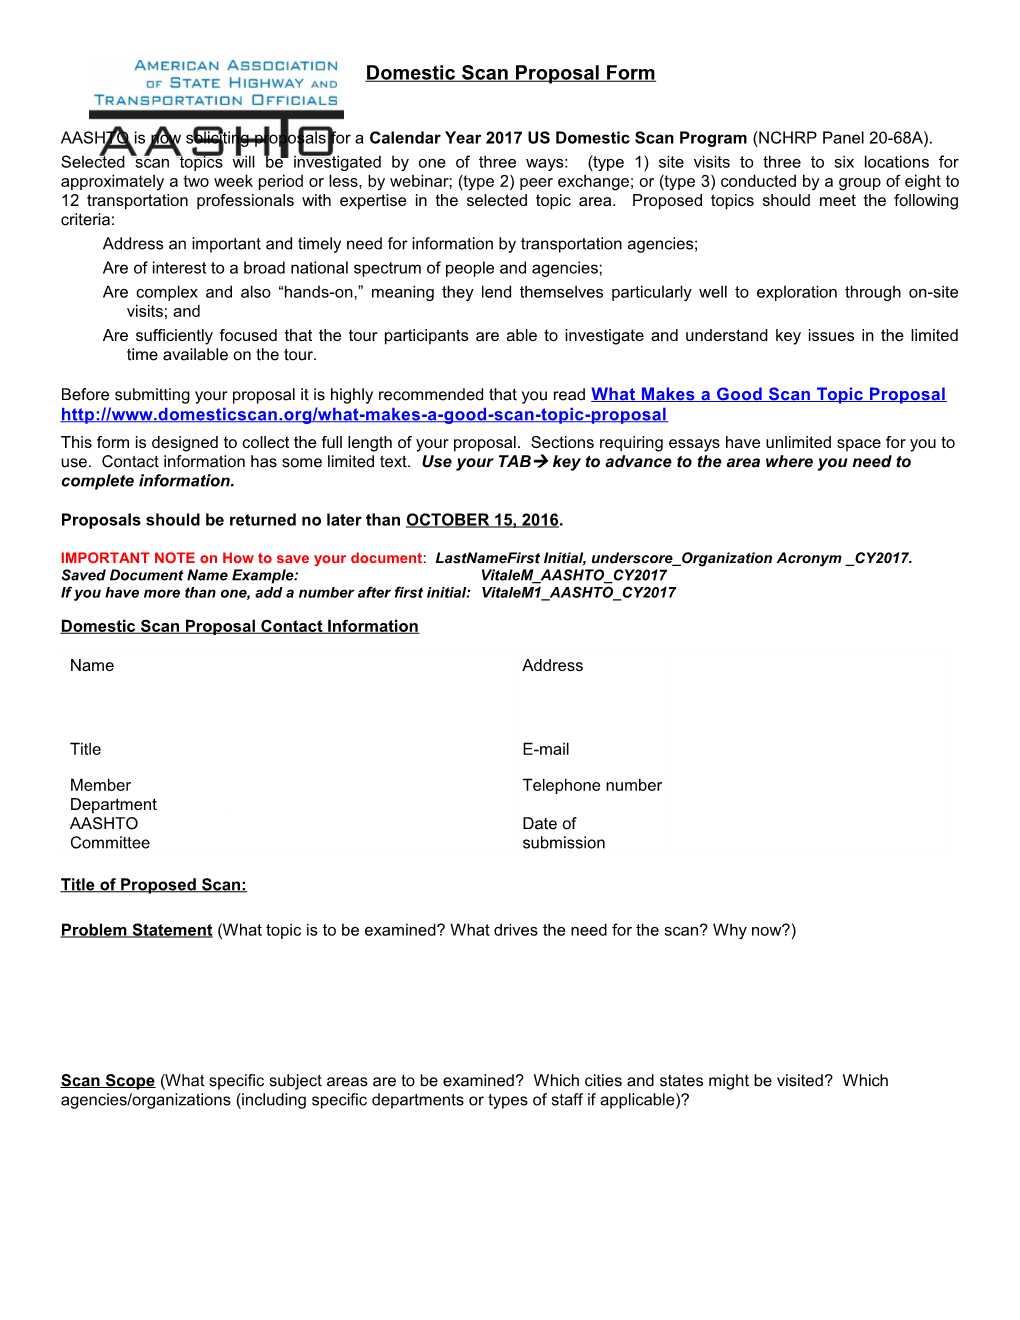 AASHTO Domestic Scan Proposal Form s6